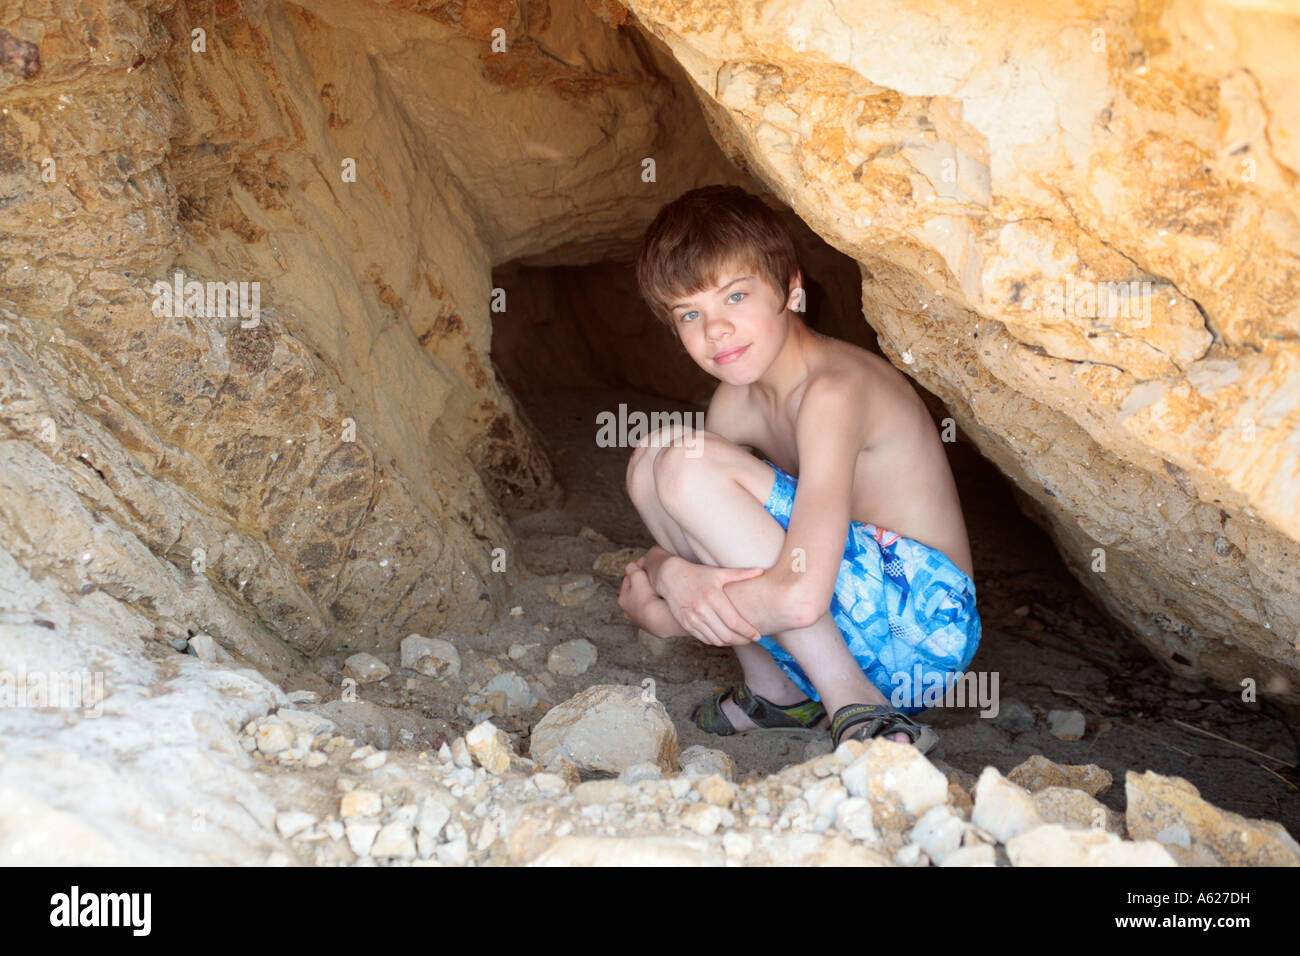 portrait-of-a-young-boy-hiding-in-a-cave